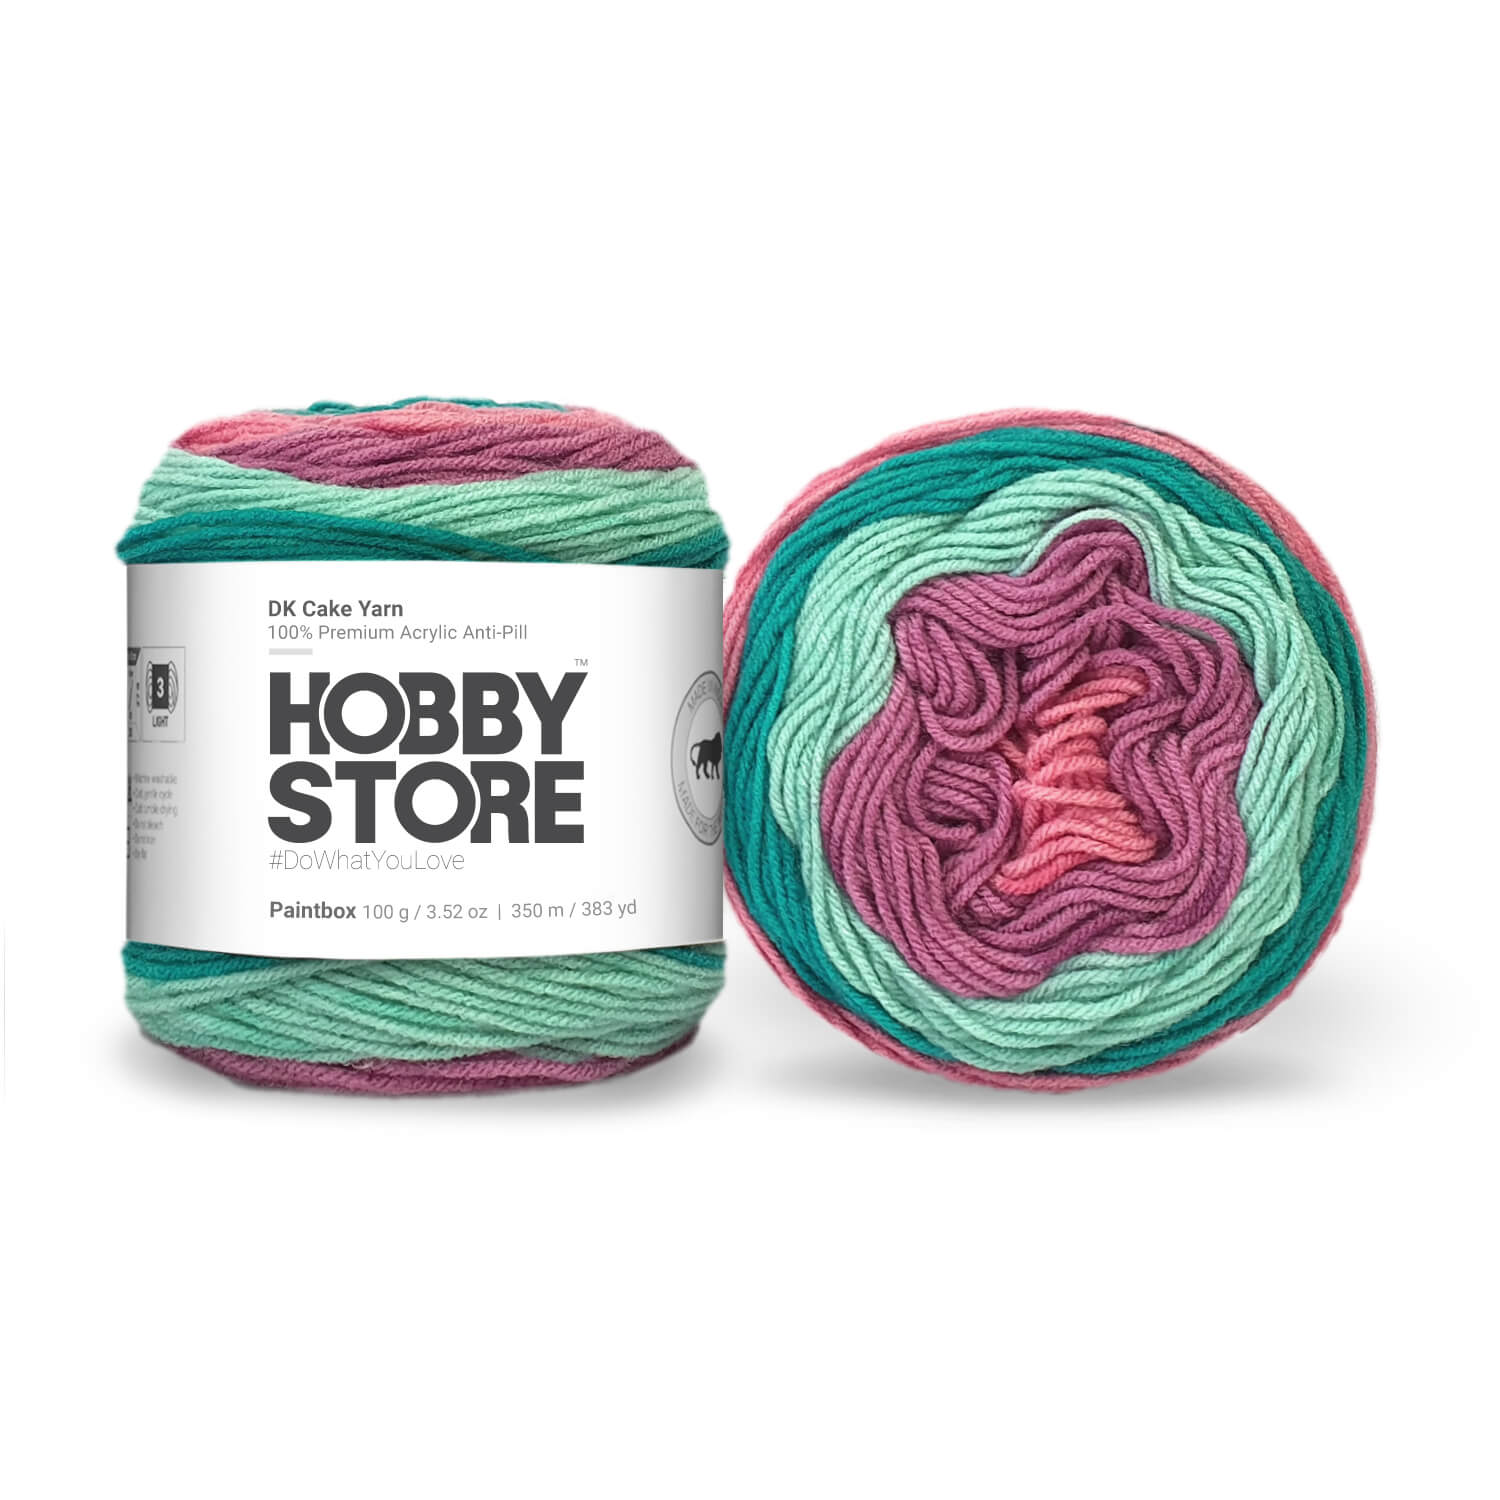 Spinrite Yarn Factory Outlet - While Caron Cakes are sold out, give Bernat  Super Value Stripes a try. 100% Acrylic. 5 oz / 142 g, 264 yds / 241 m.  Show your